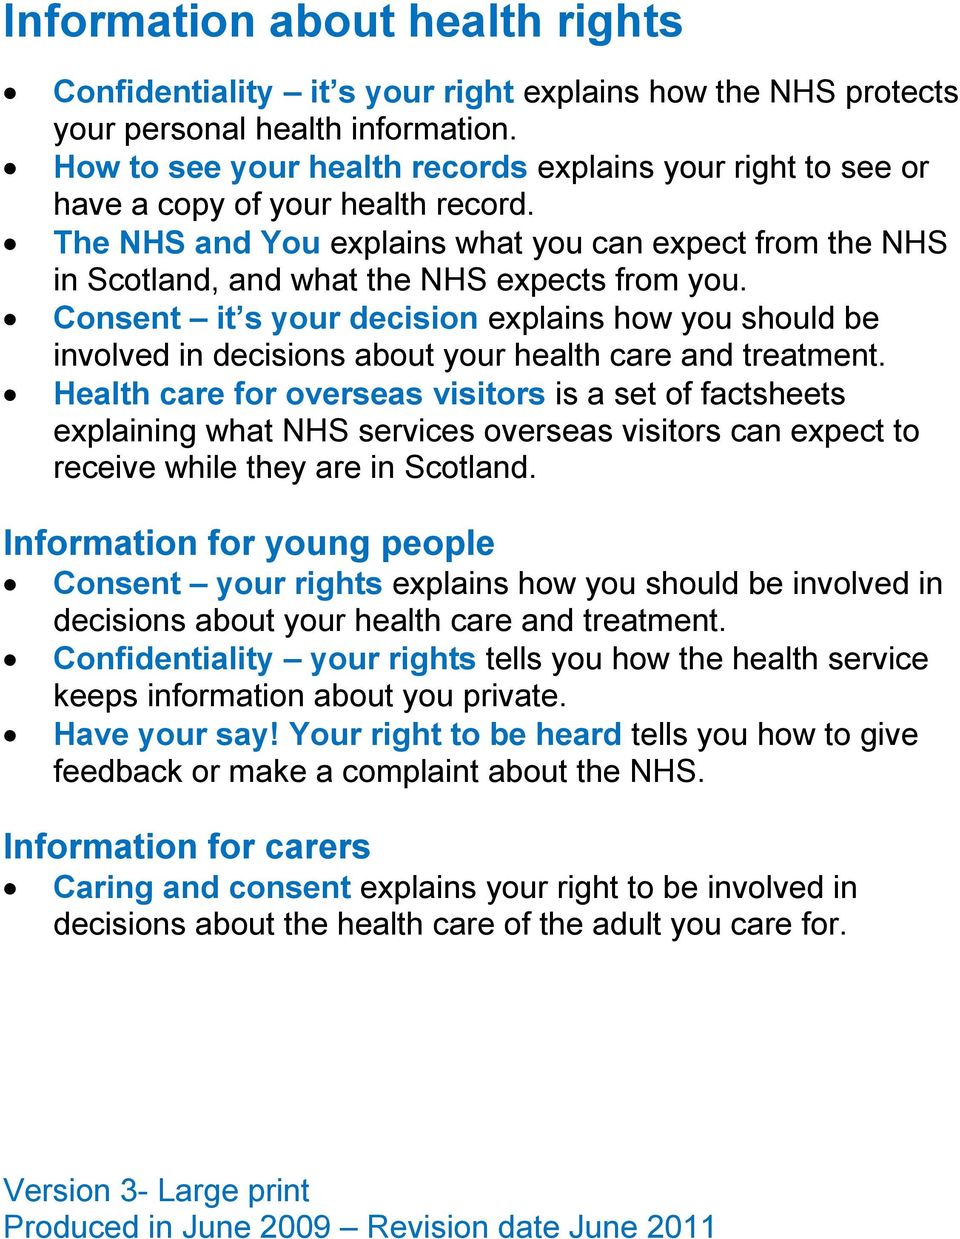 The NHS and You explains what you can expect from the NHS in Scotland, and what the NHS expects from you.